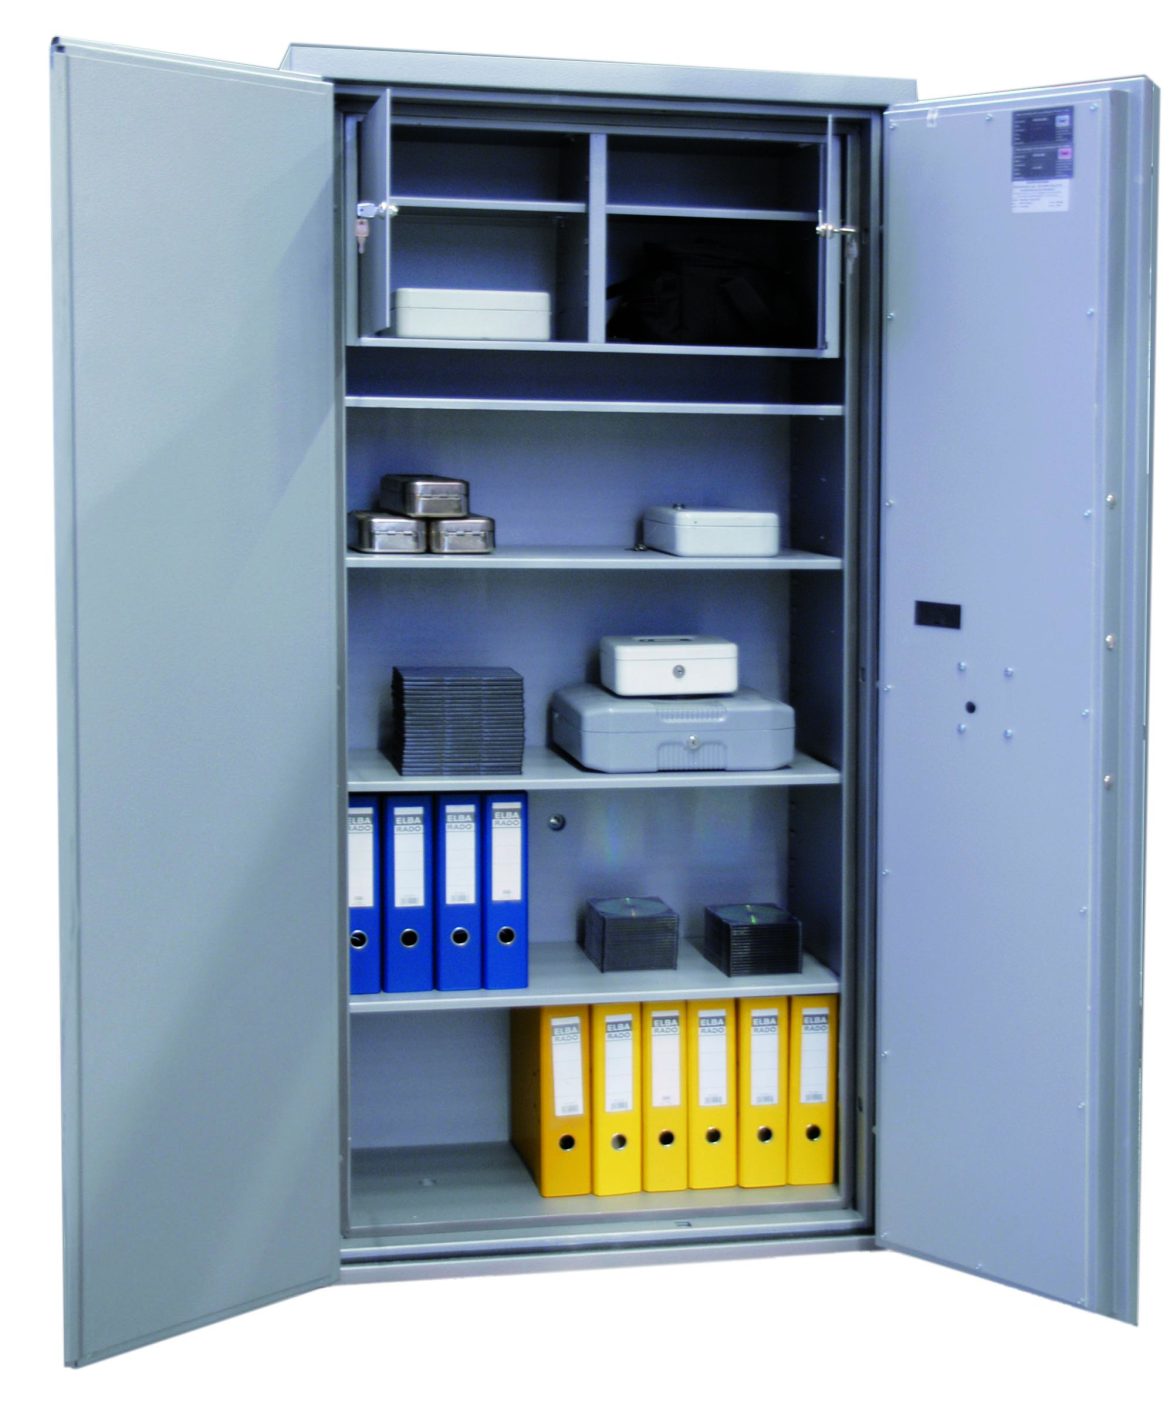 Selecting a Safe for Your Valuable Items